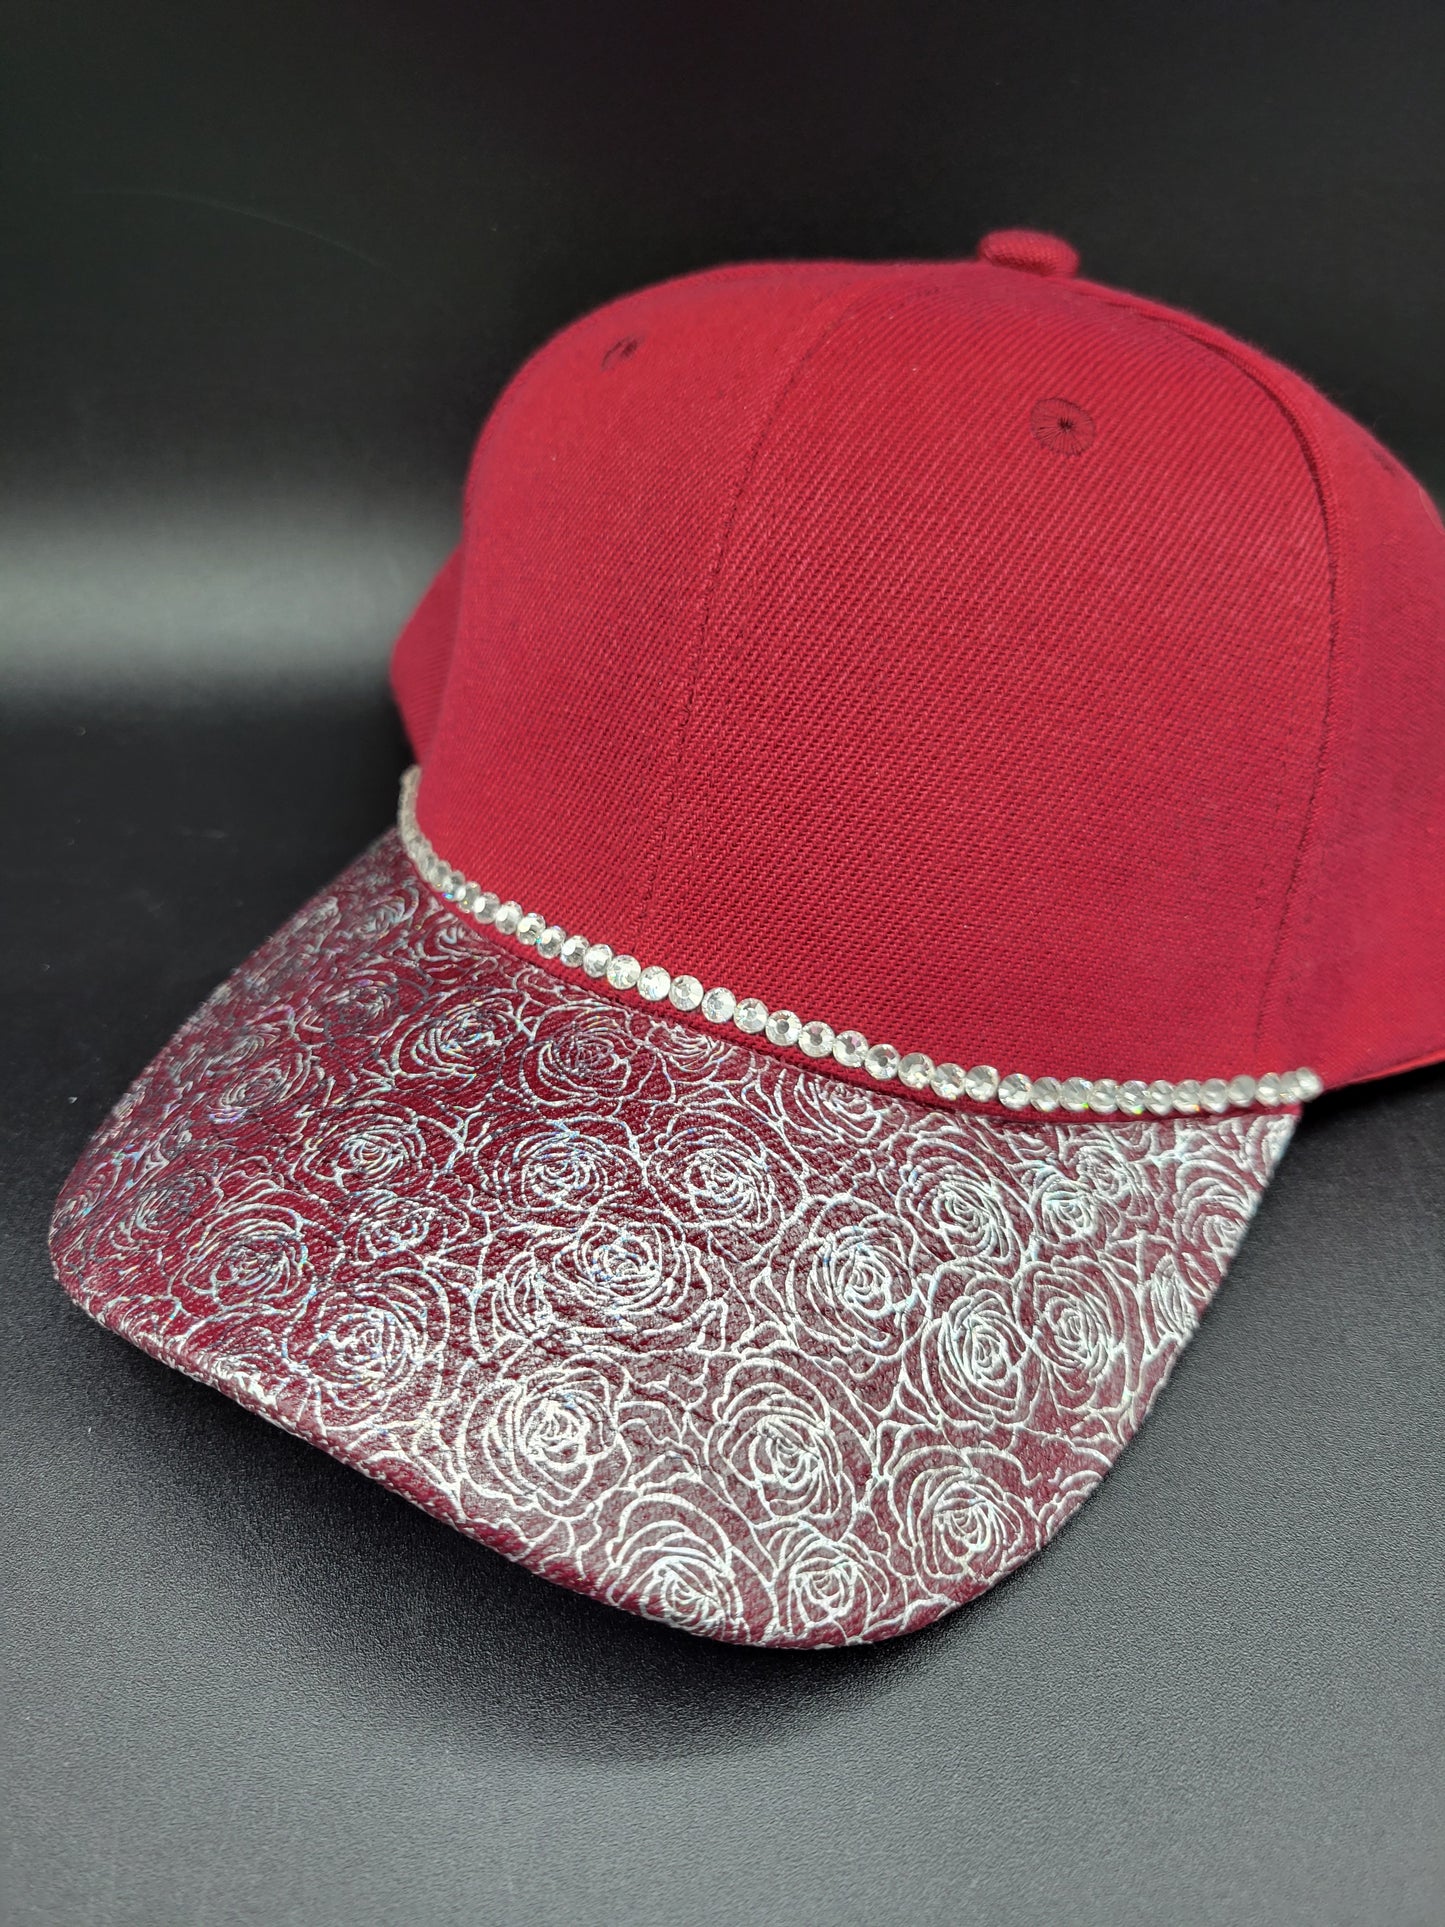 Burgundy dad cap with silver roses foil and silver rhinestones